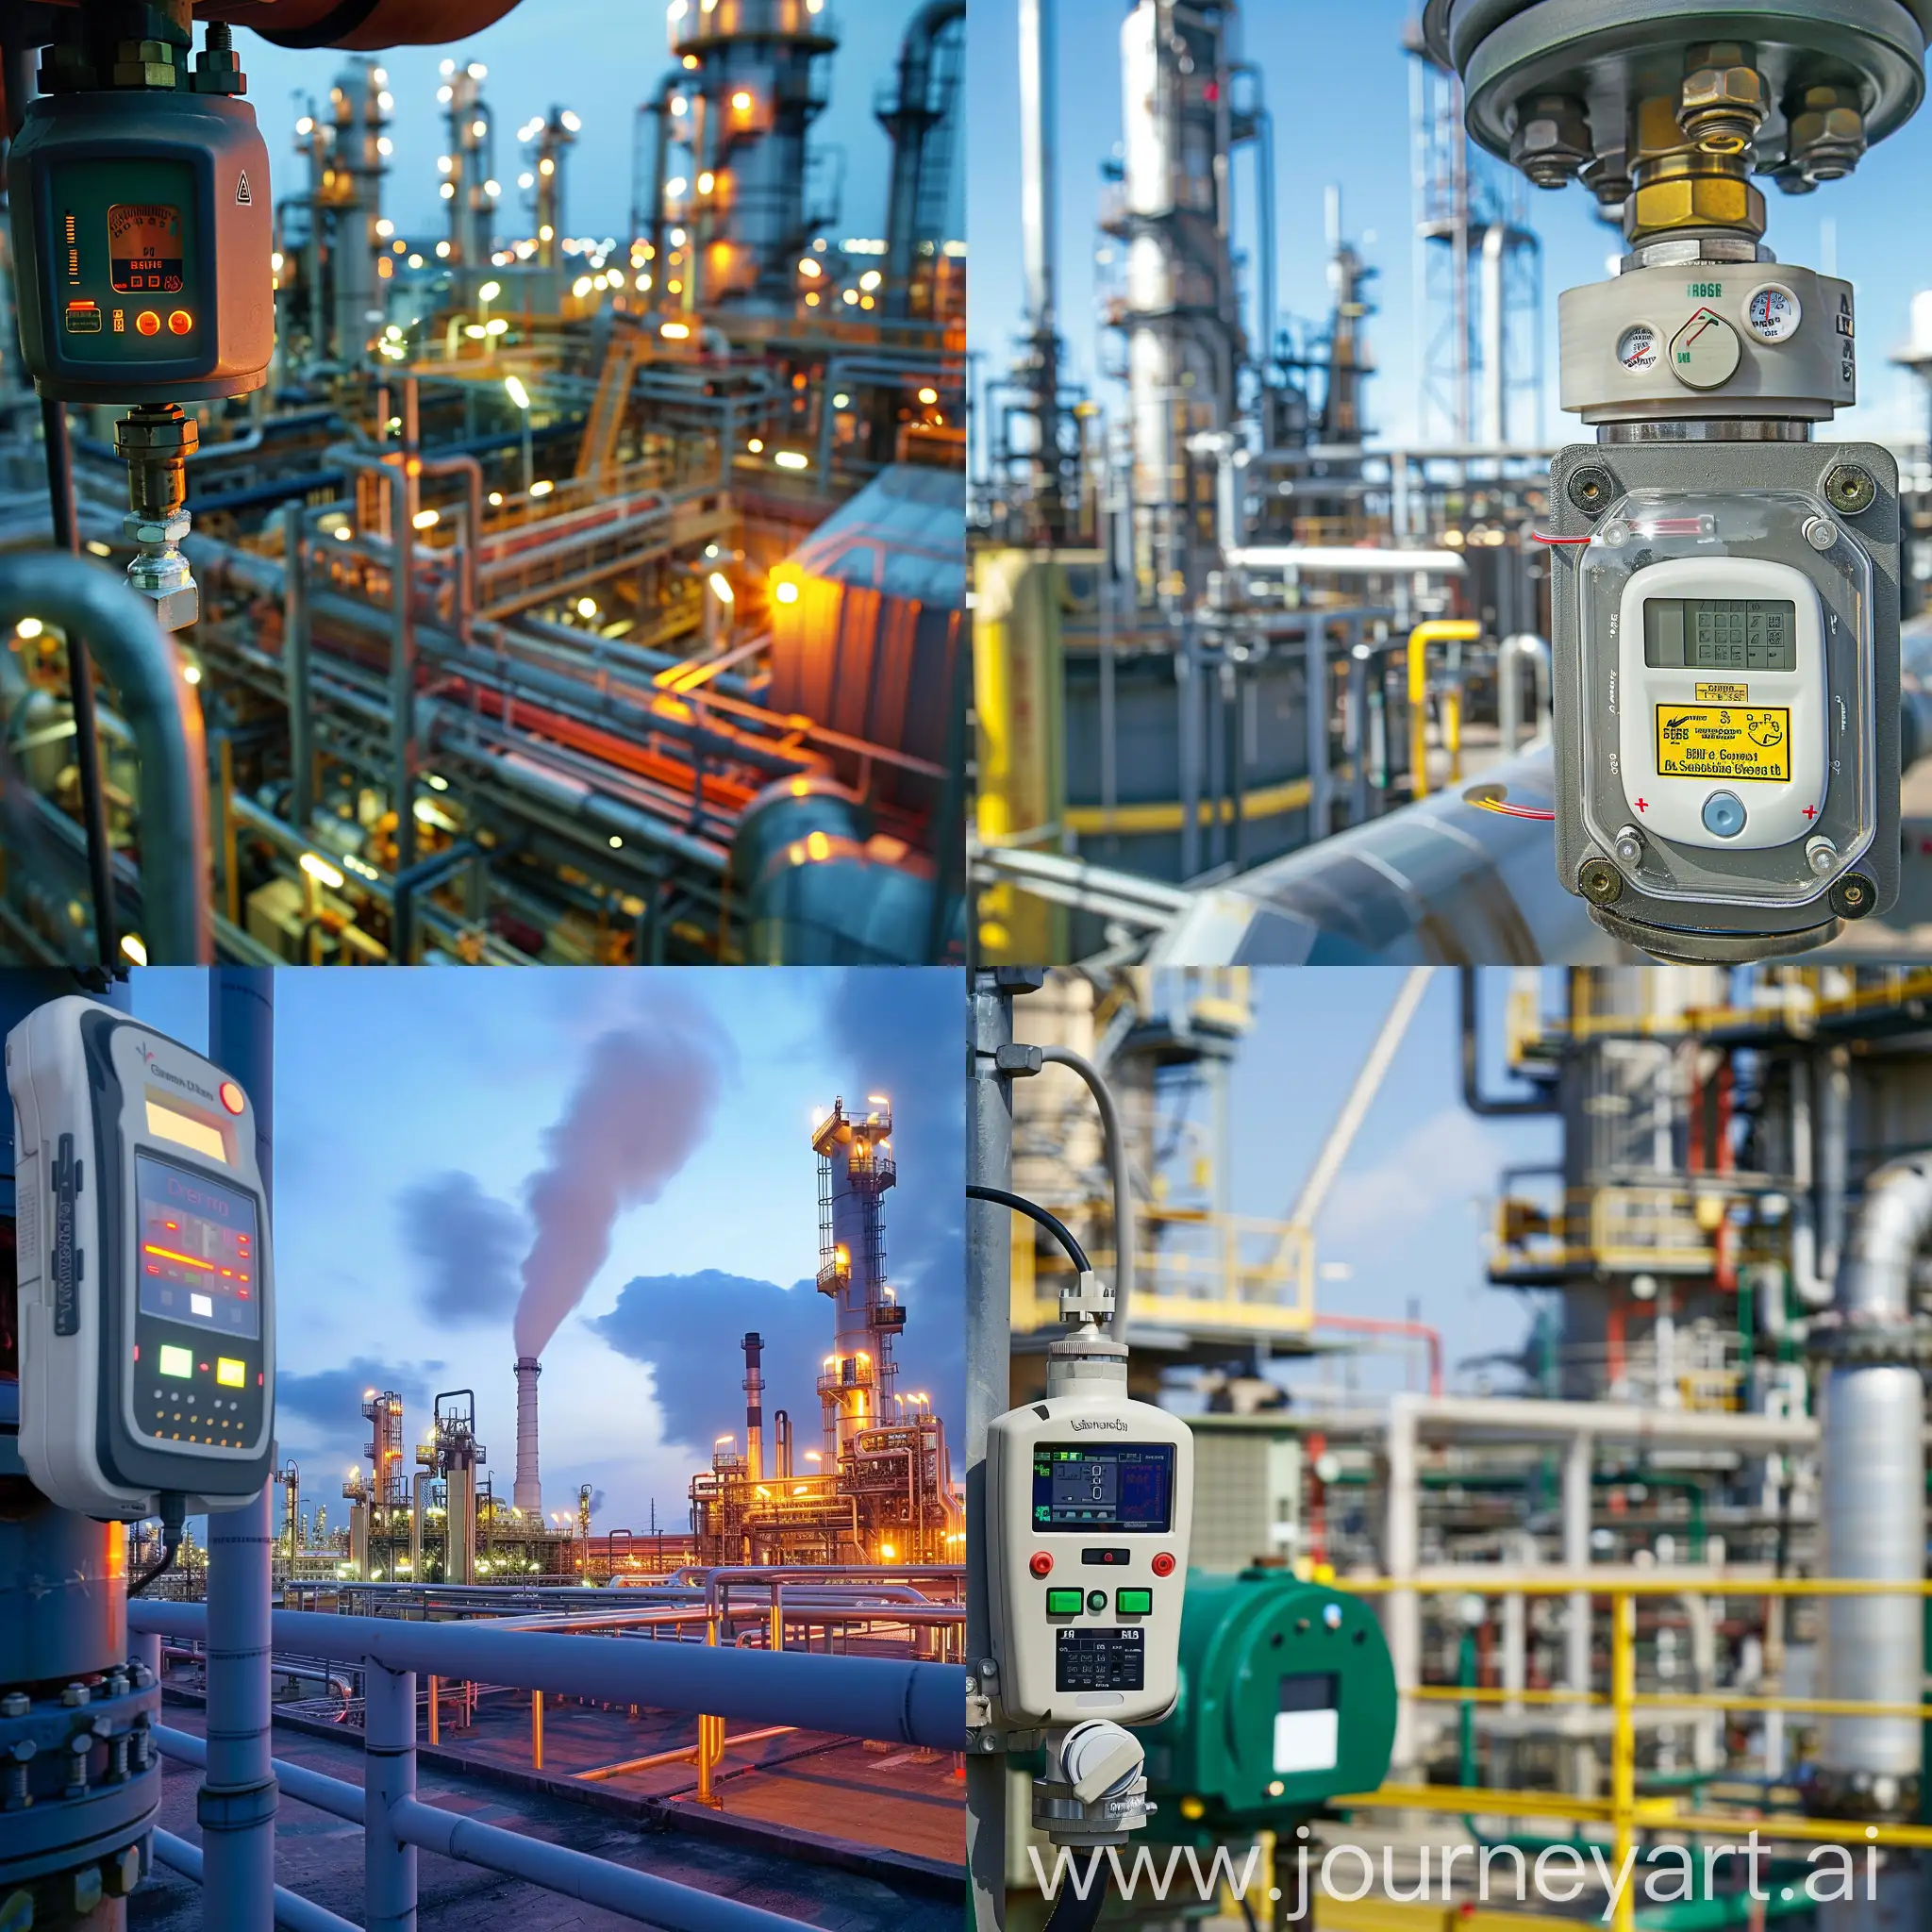 A view of the products and services of a gas detection device manufacturing company with a gas refinery background